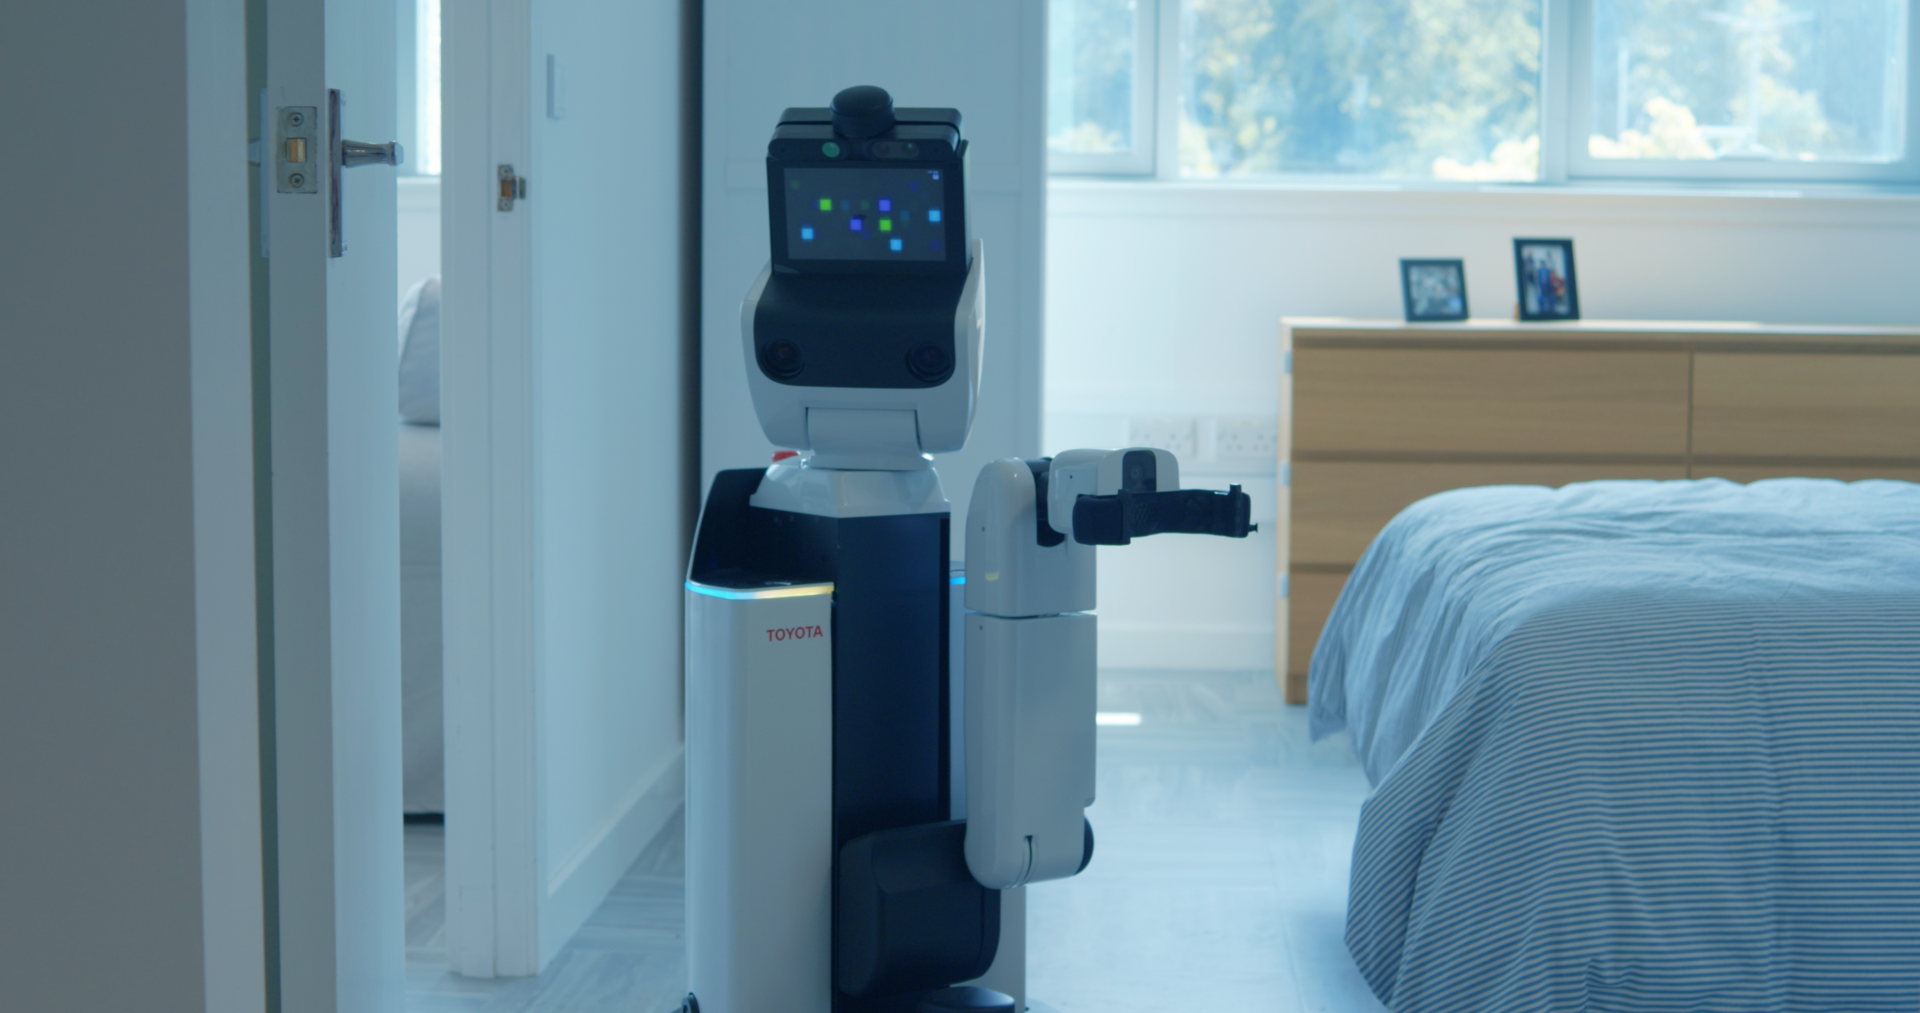 Domestic robot within bedroom setting